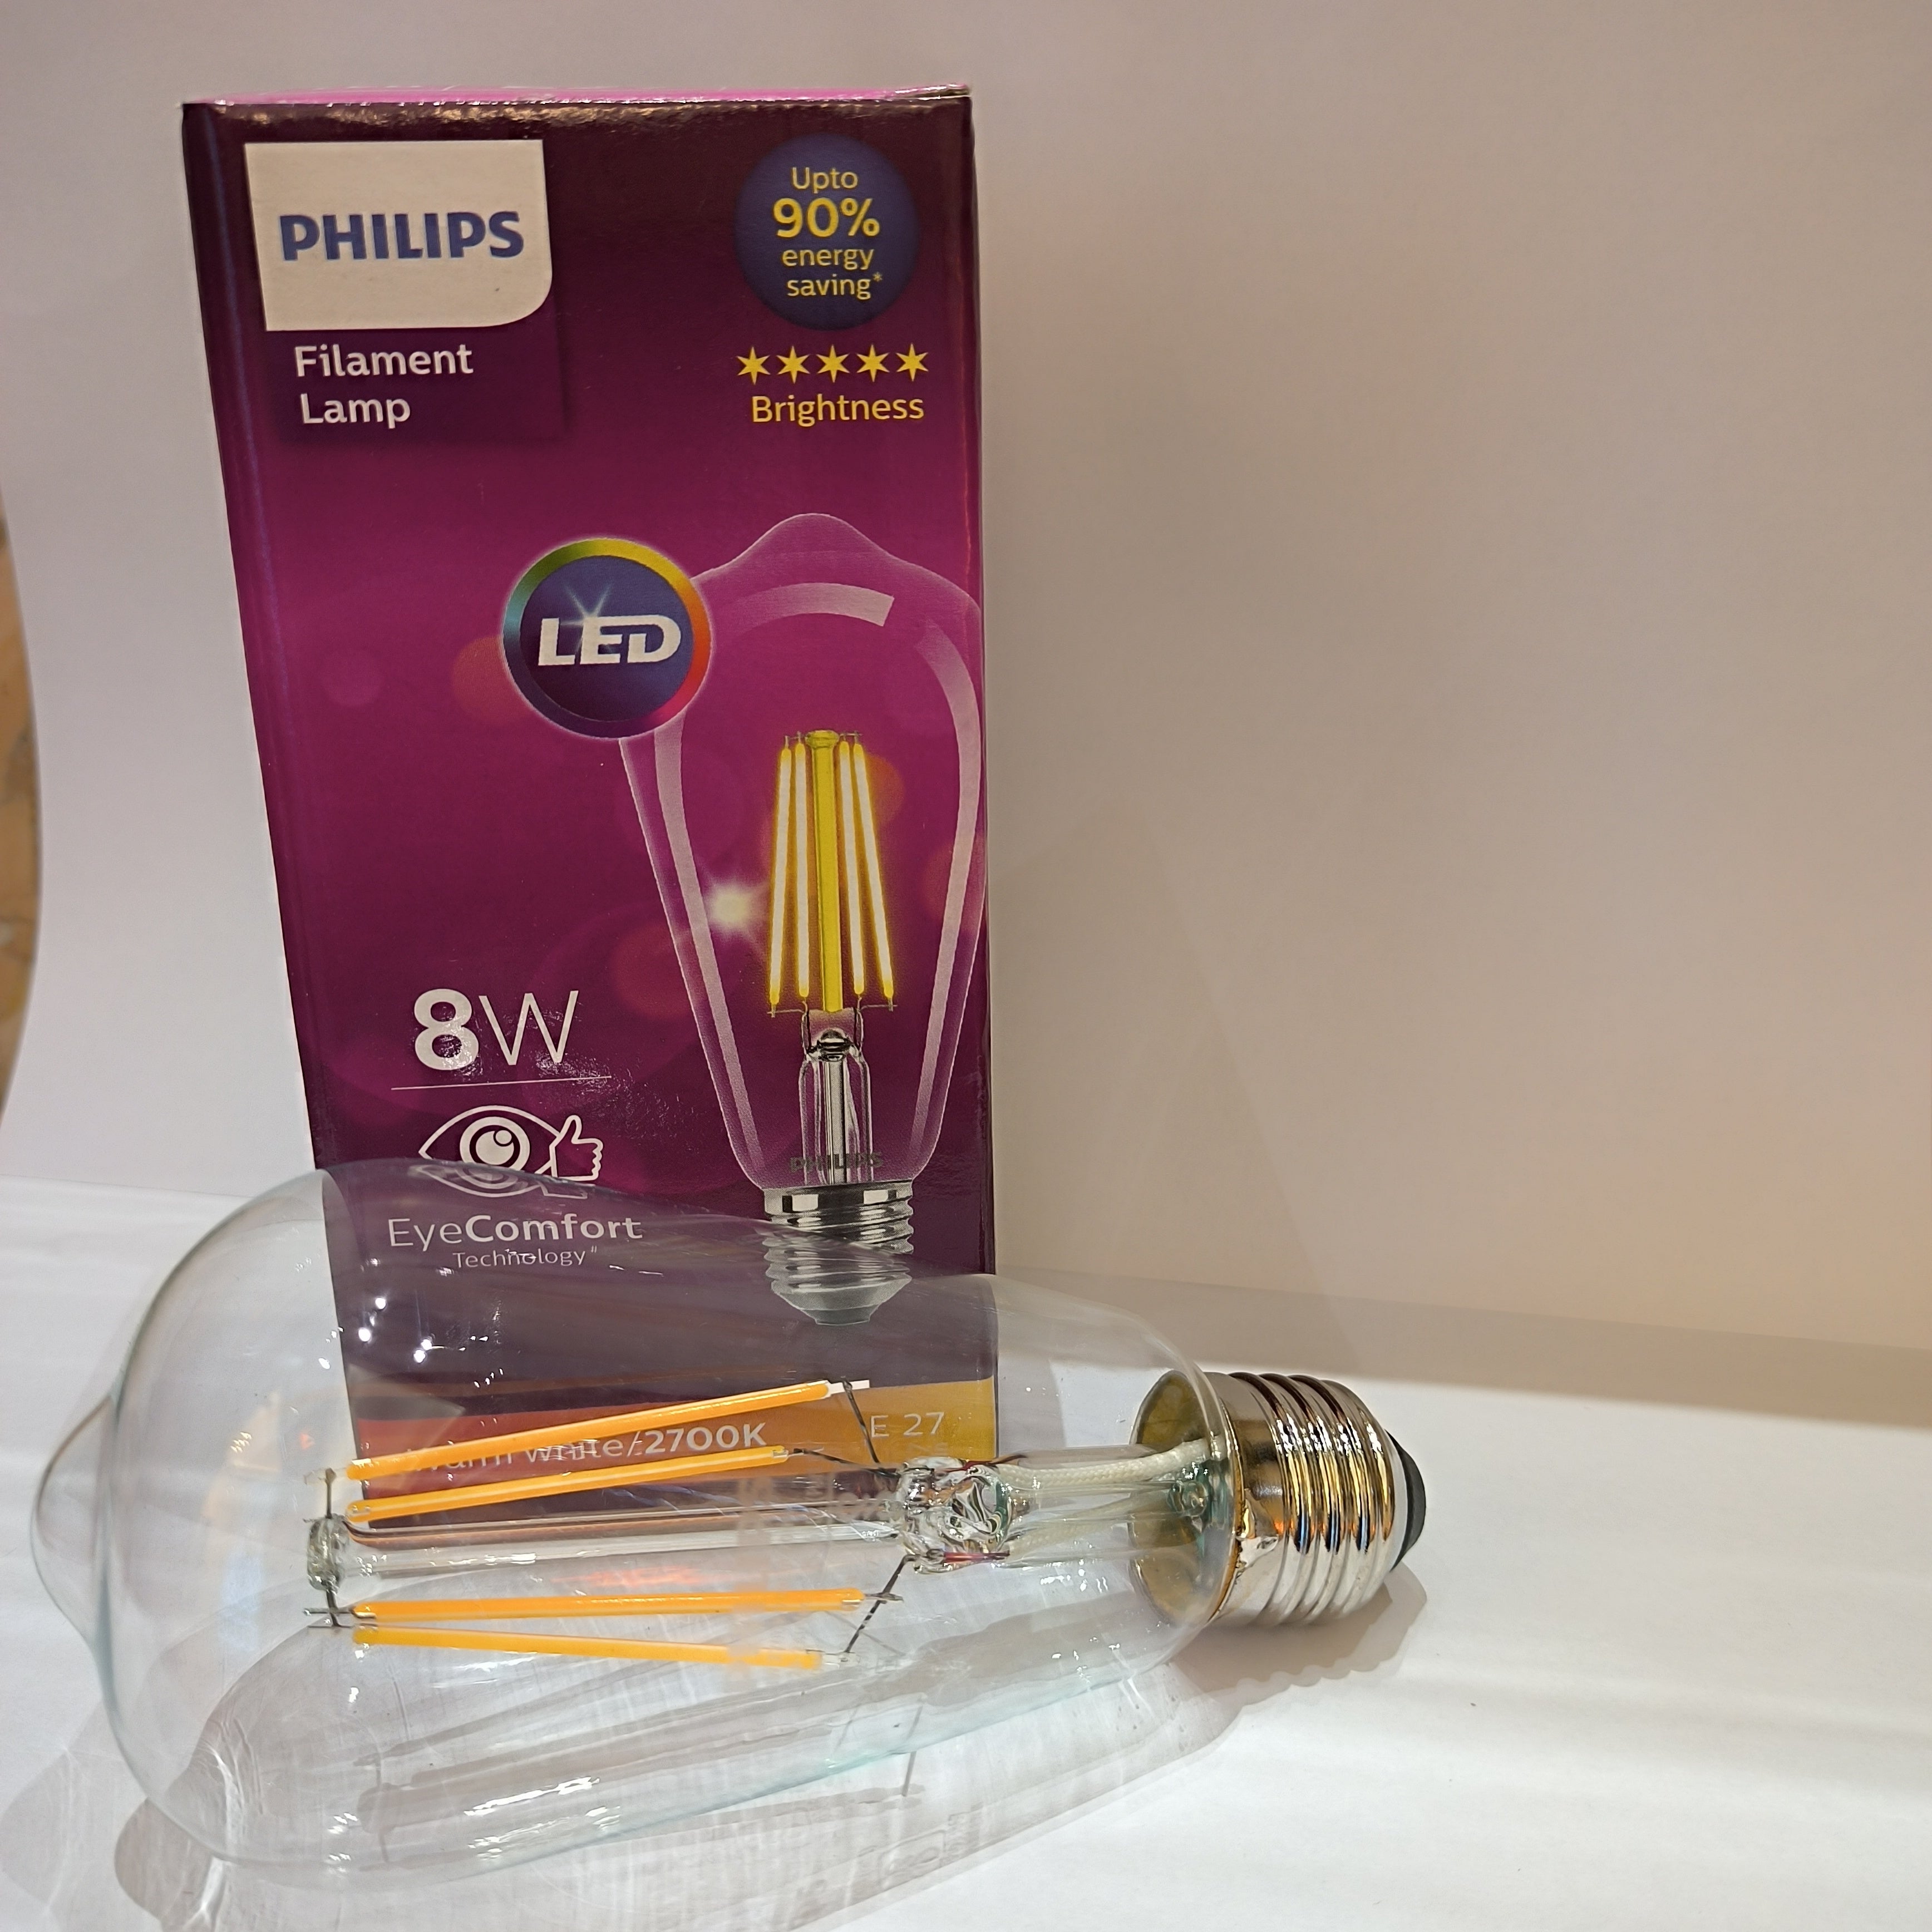 Philips E-27 Filament Lamp Warm White ST 64 Bulb - 8w LED at the Best Price